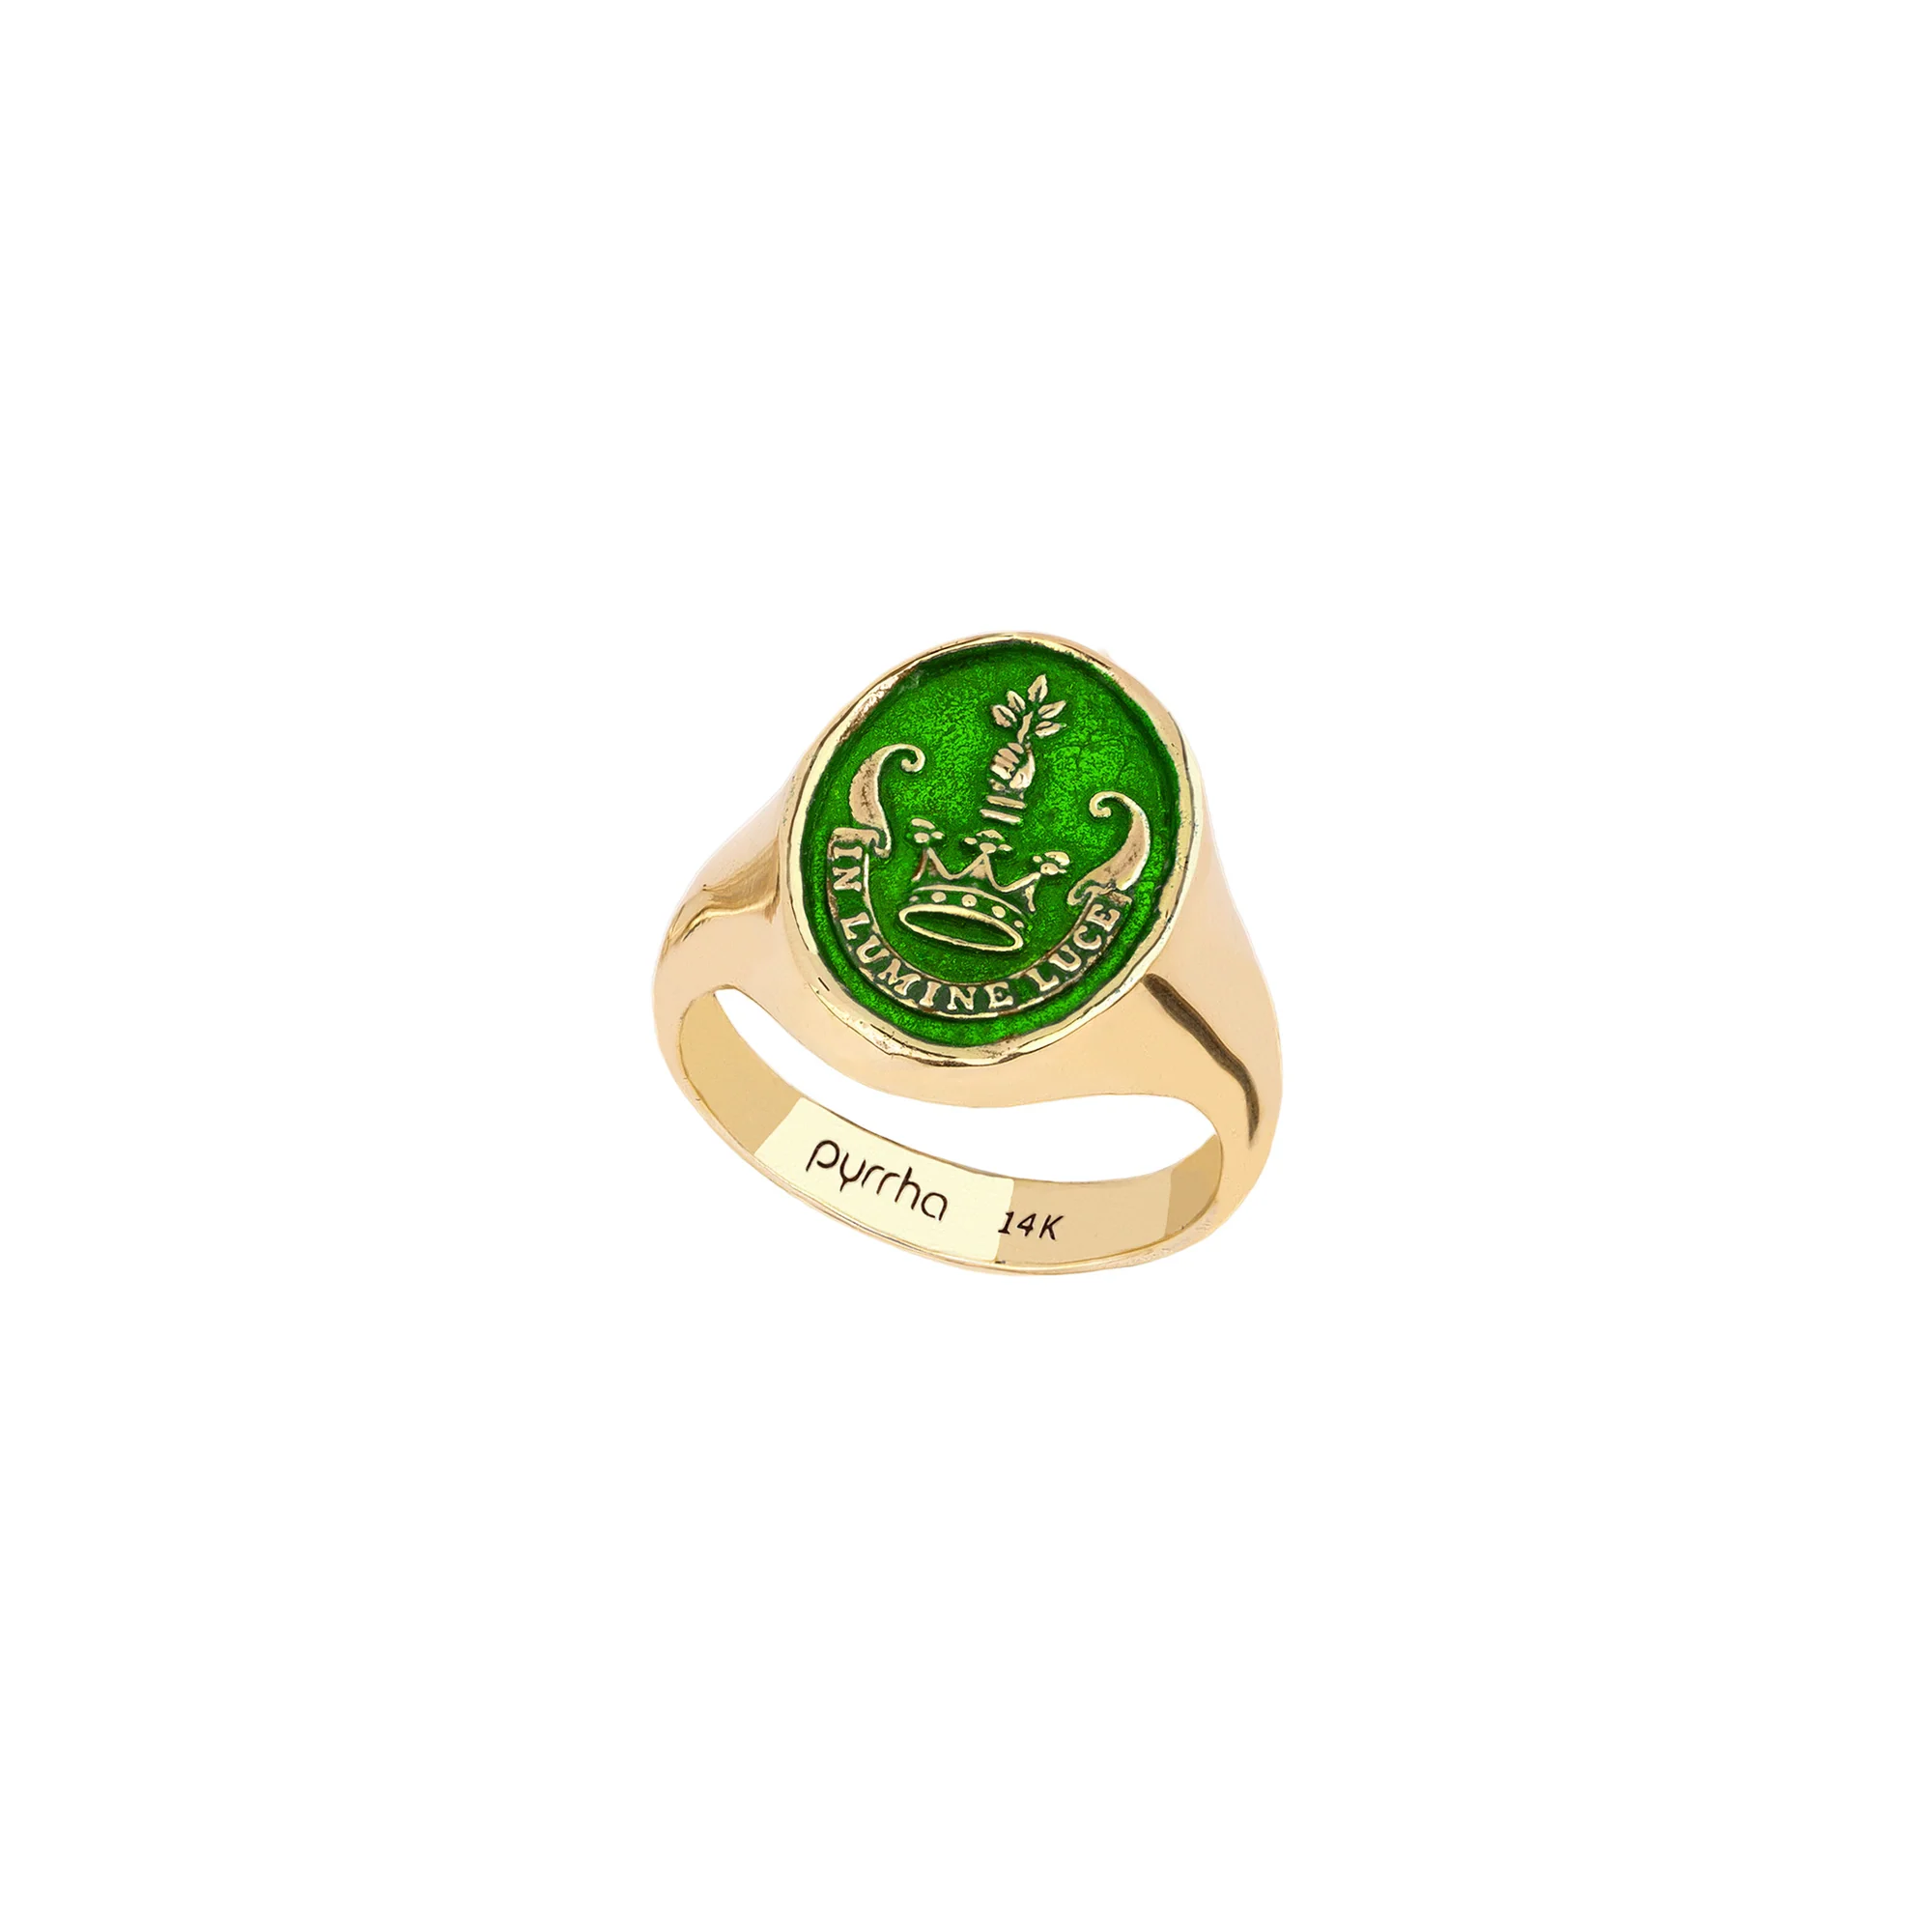 Inspiration 14K Gold Signet Ring - True Colors | Magpie Jewellery